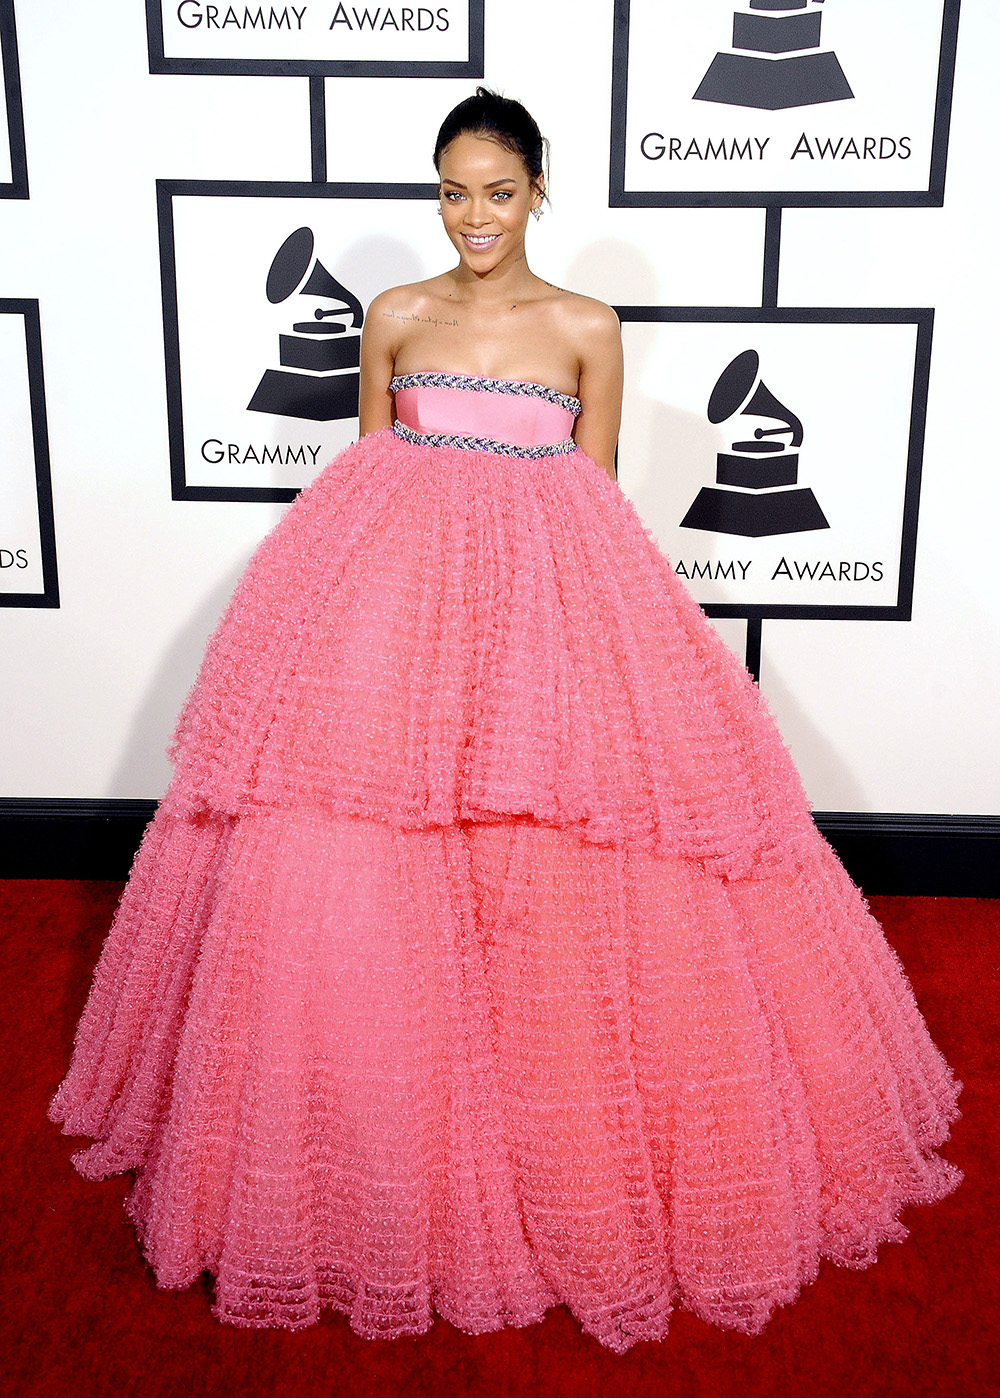 Celebs Wearing Short Dresses At The Grammy Awards: Photos